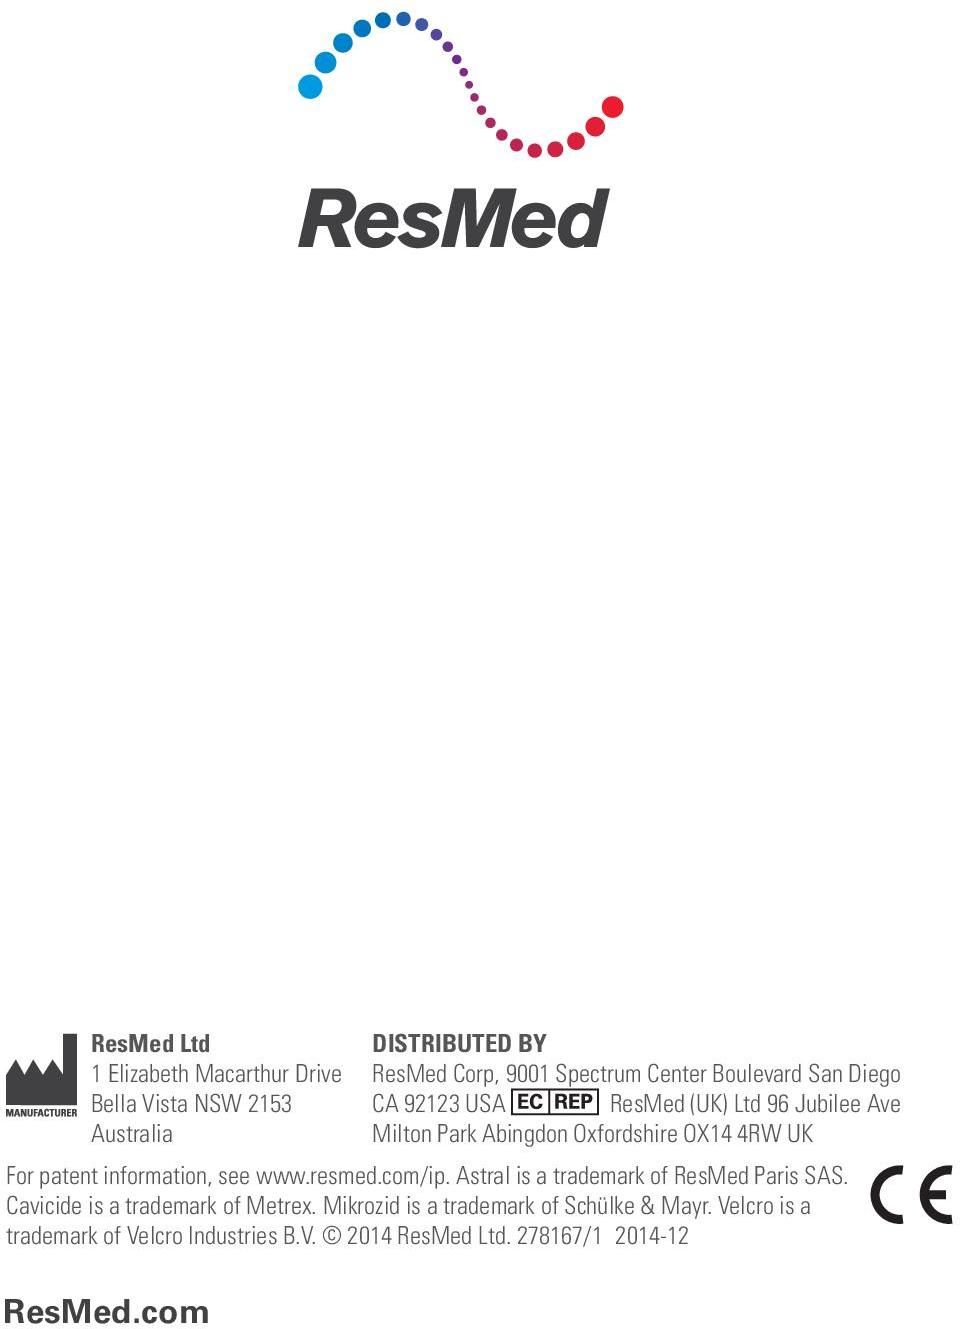 information, see www.resmed.com/ip. Astral is a trademark of ResMed Paris SAS. Cavicide is a trademark of Metrex.